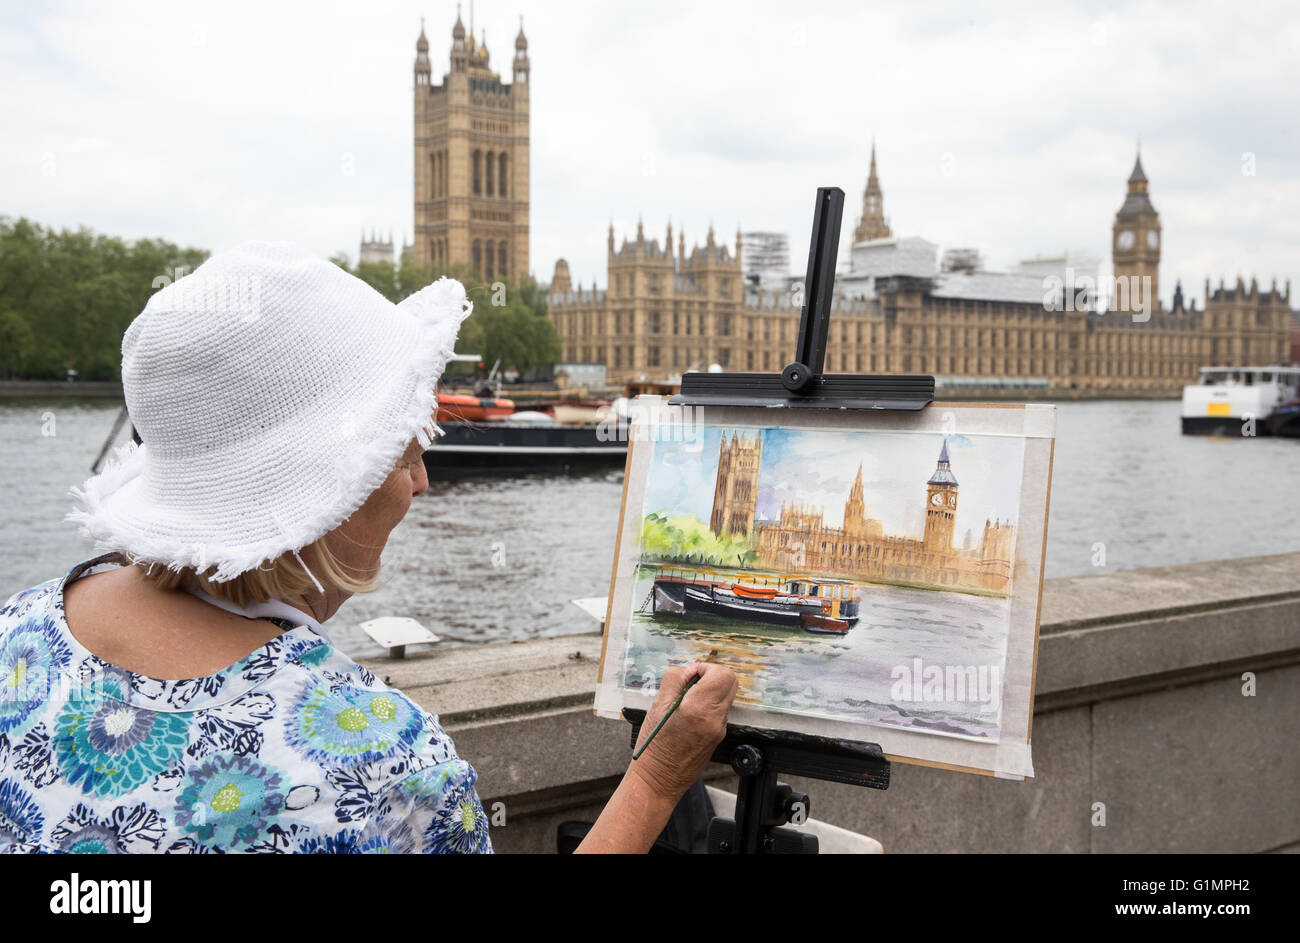 An artist paints the Houses of Parliament and Big Ben from across the river Thames Stock Photo